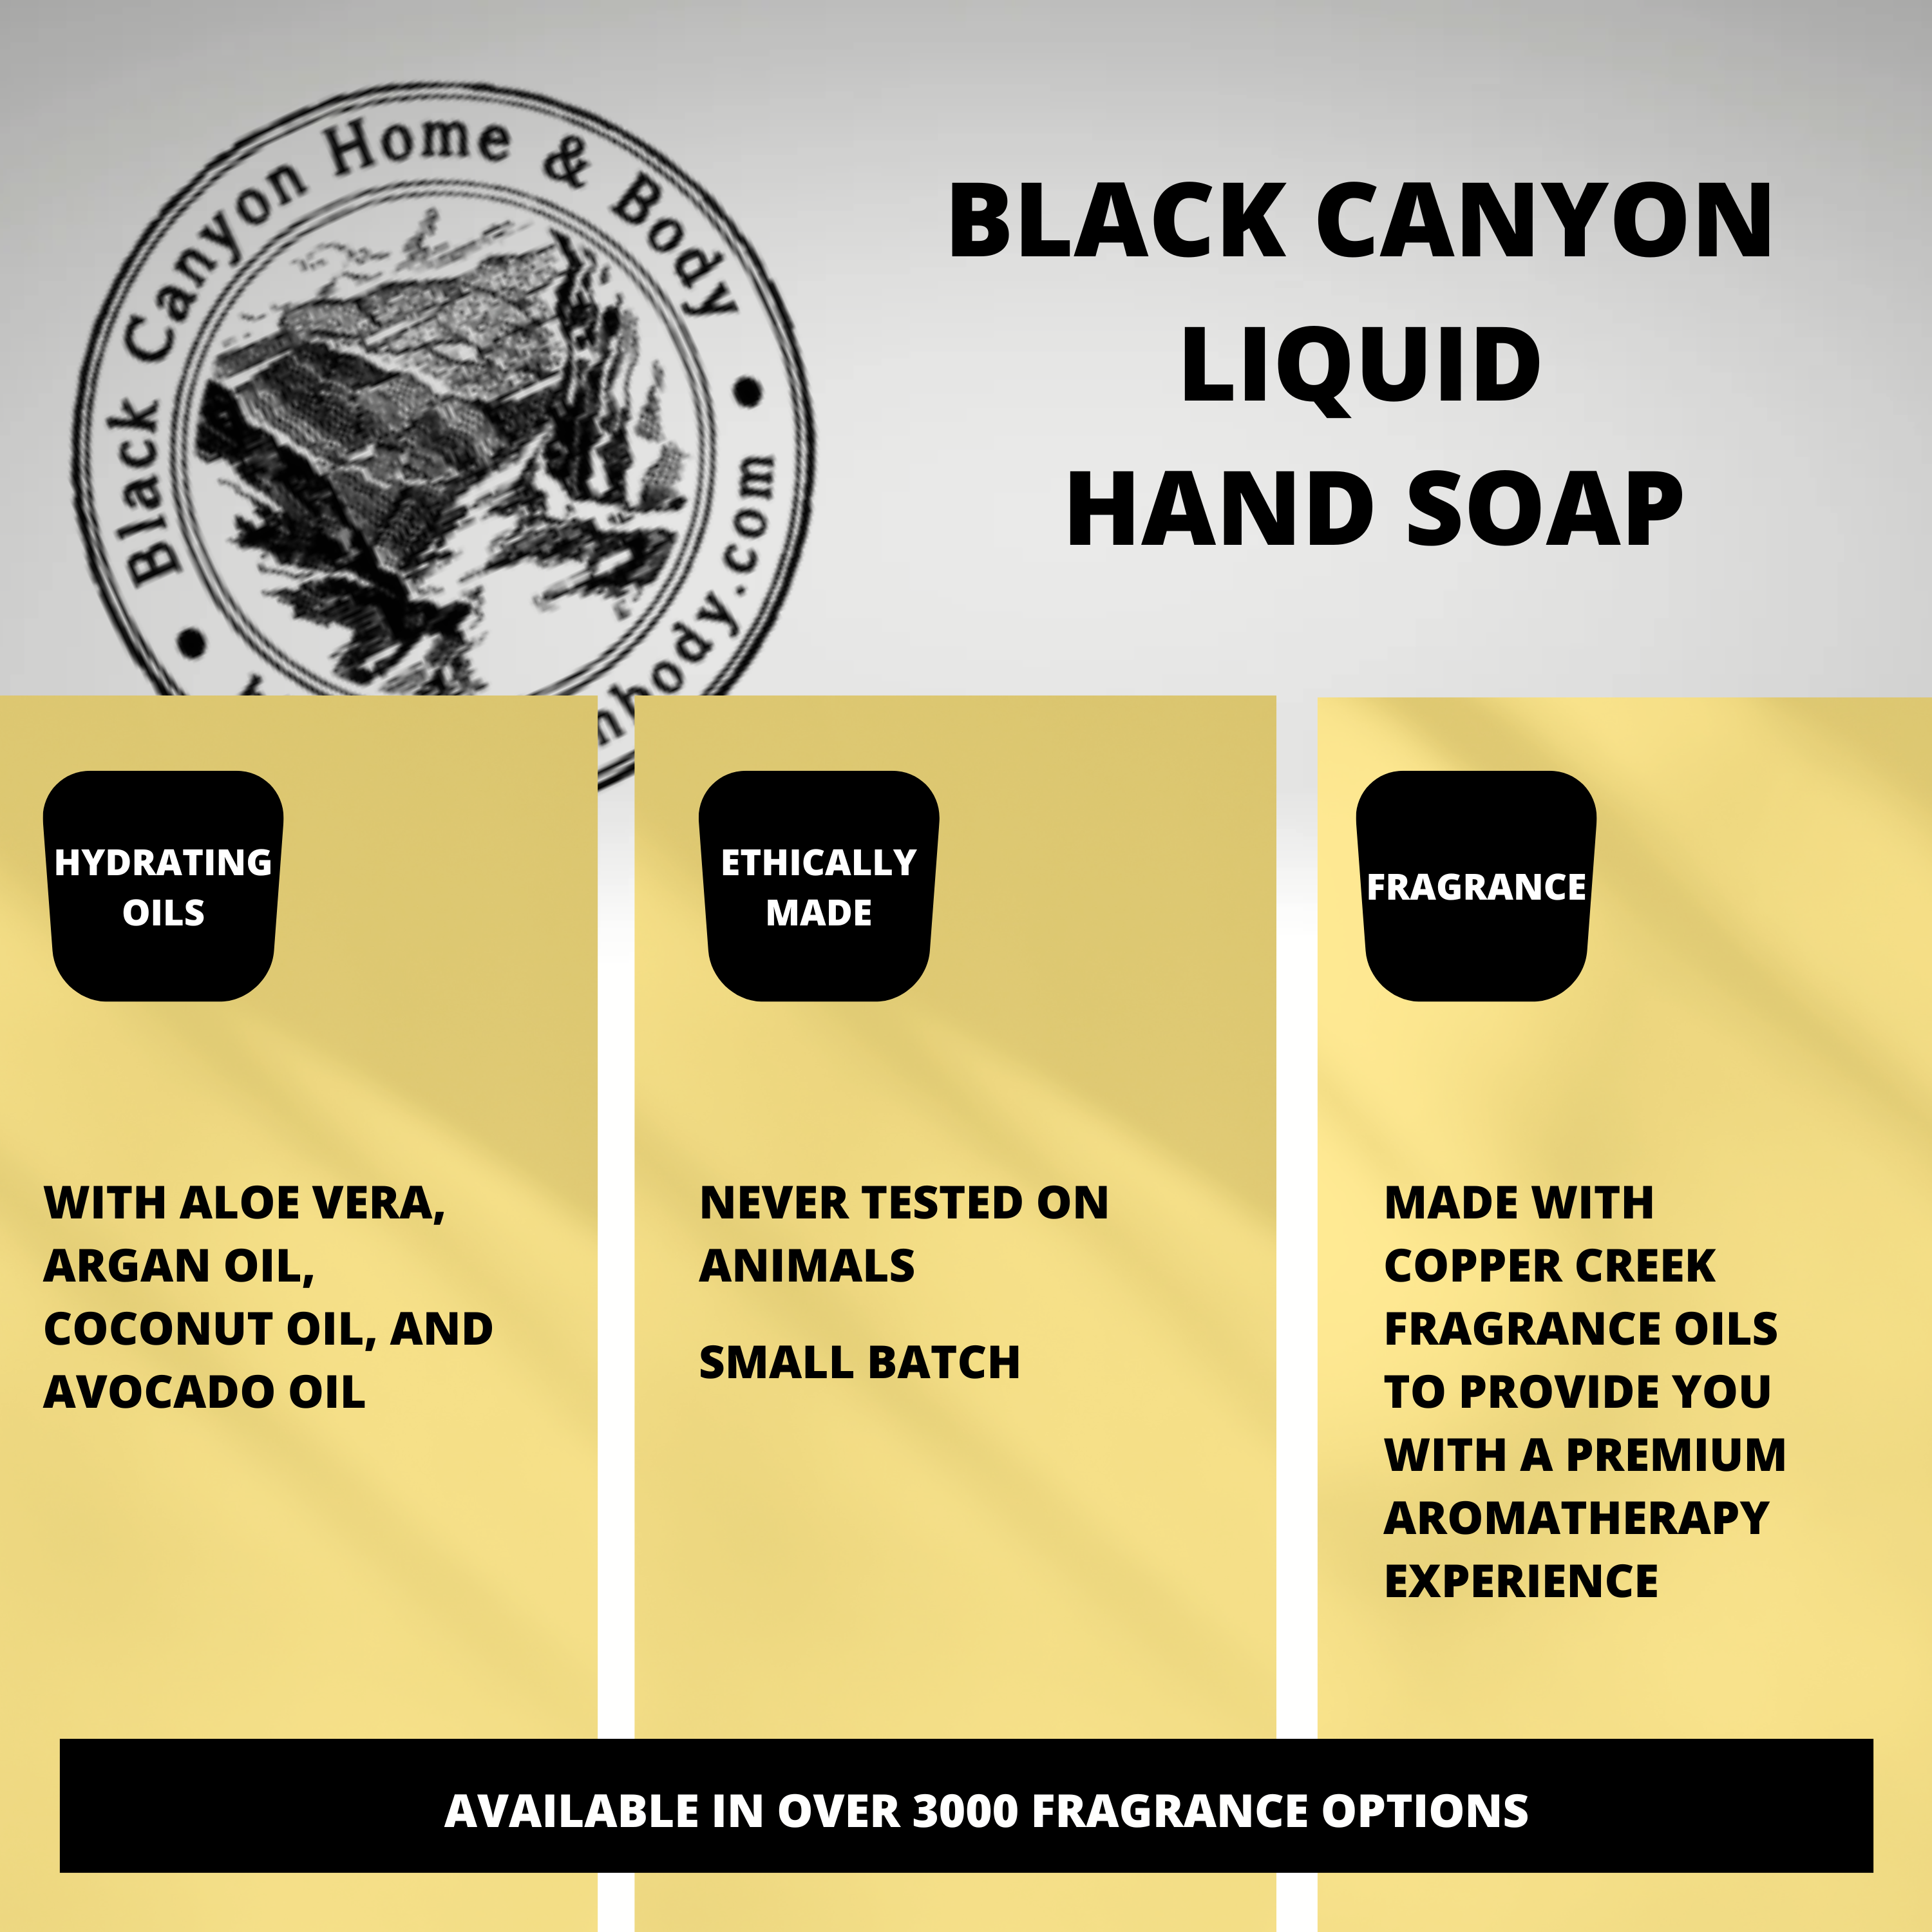 Black Canyon Tangerine & Crushed Ginger Scented Liquid Hand Soap